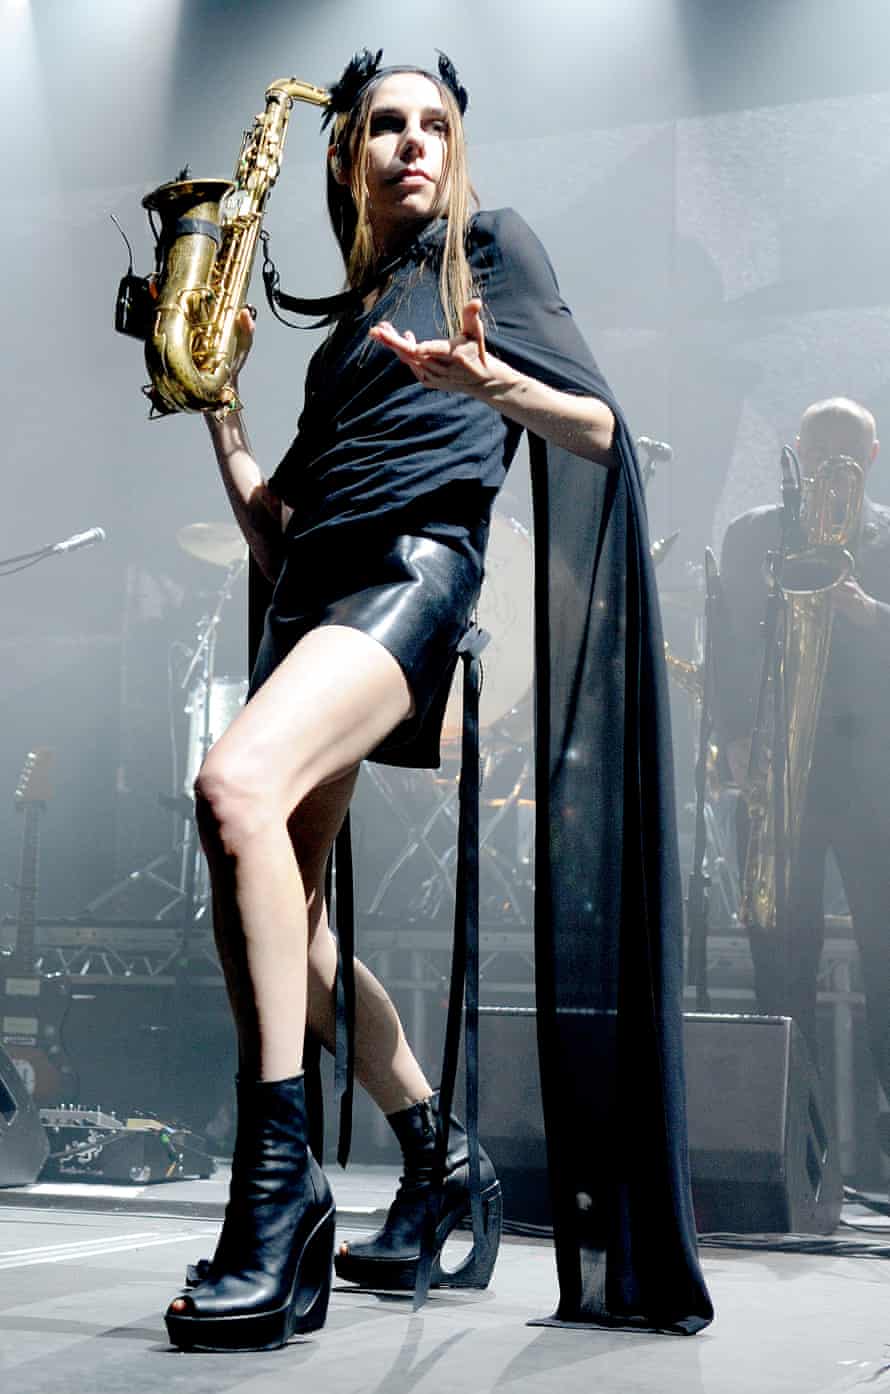 PJ Harvey on stage in manchester in 2016